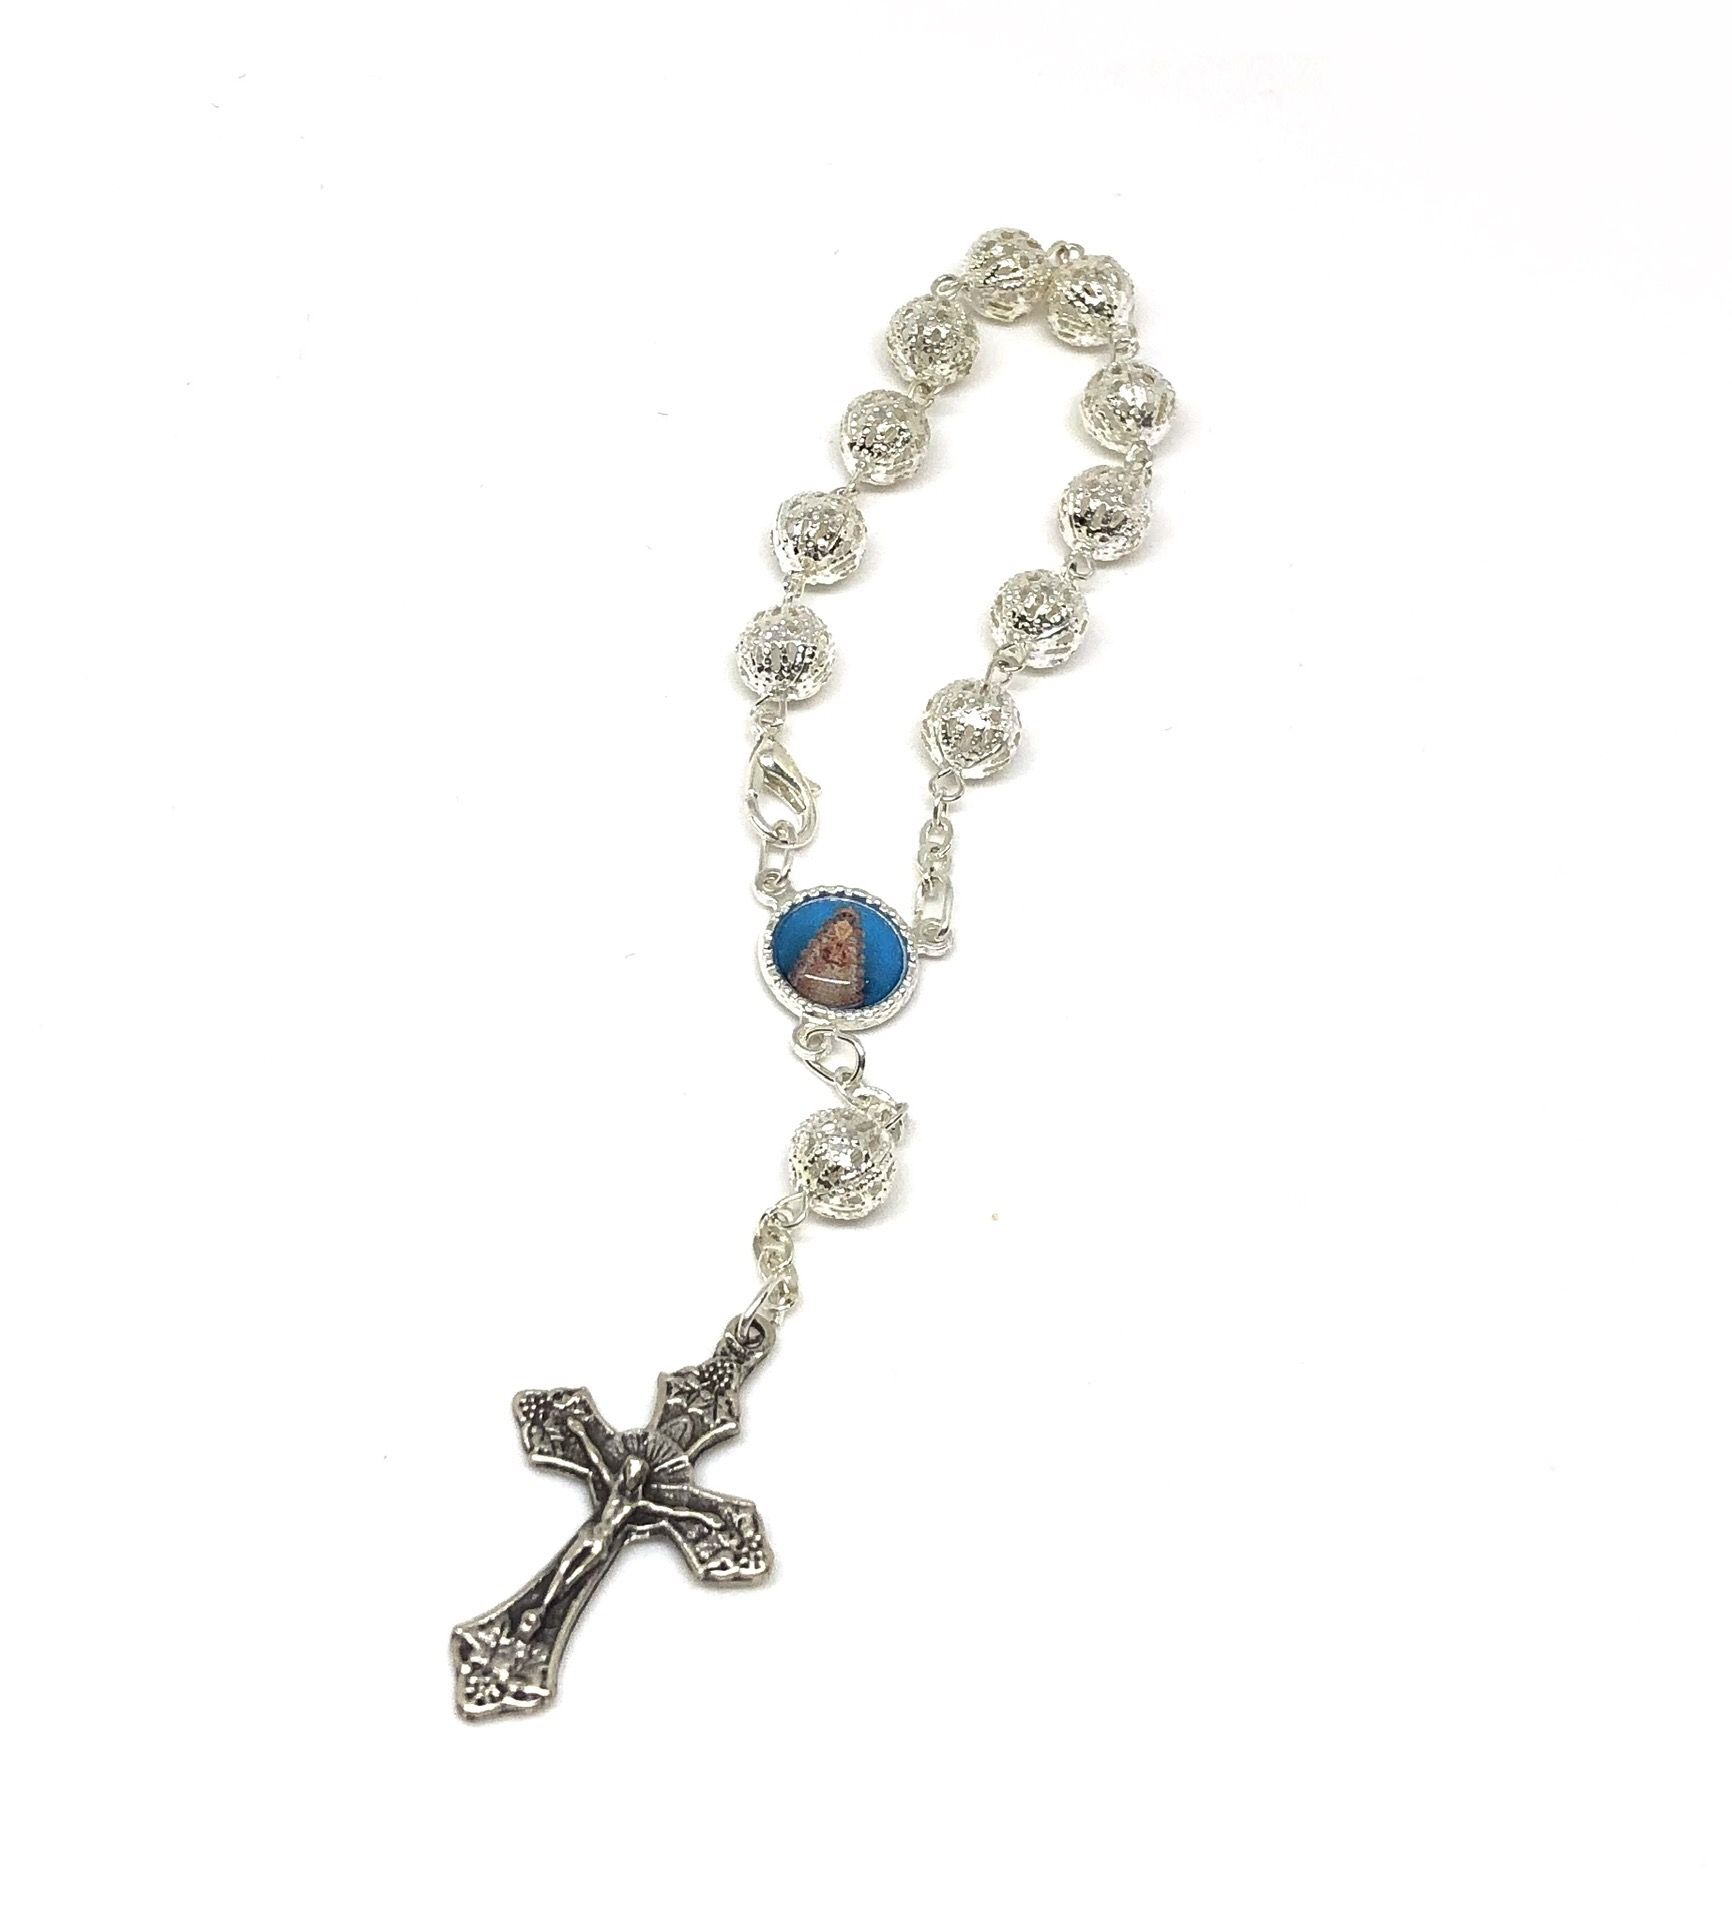 Virgin del Rocio hand rosary made of large round filigree beads made of silver plated metal. Includes metal cross.